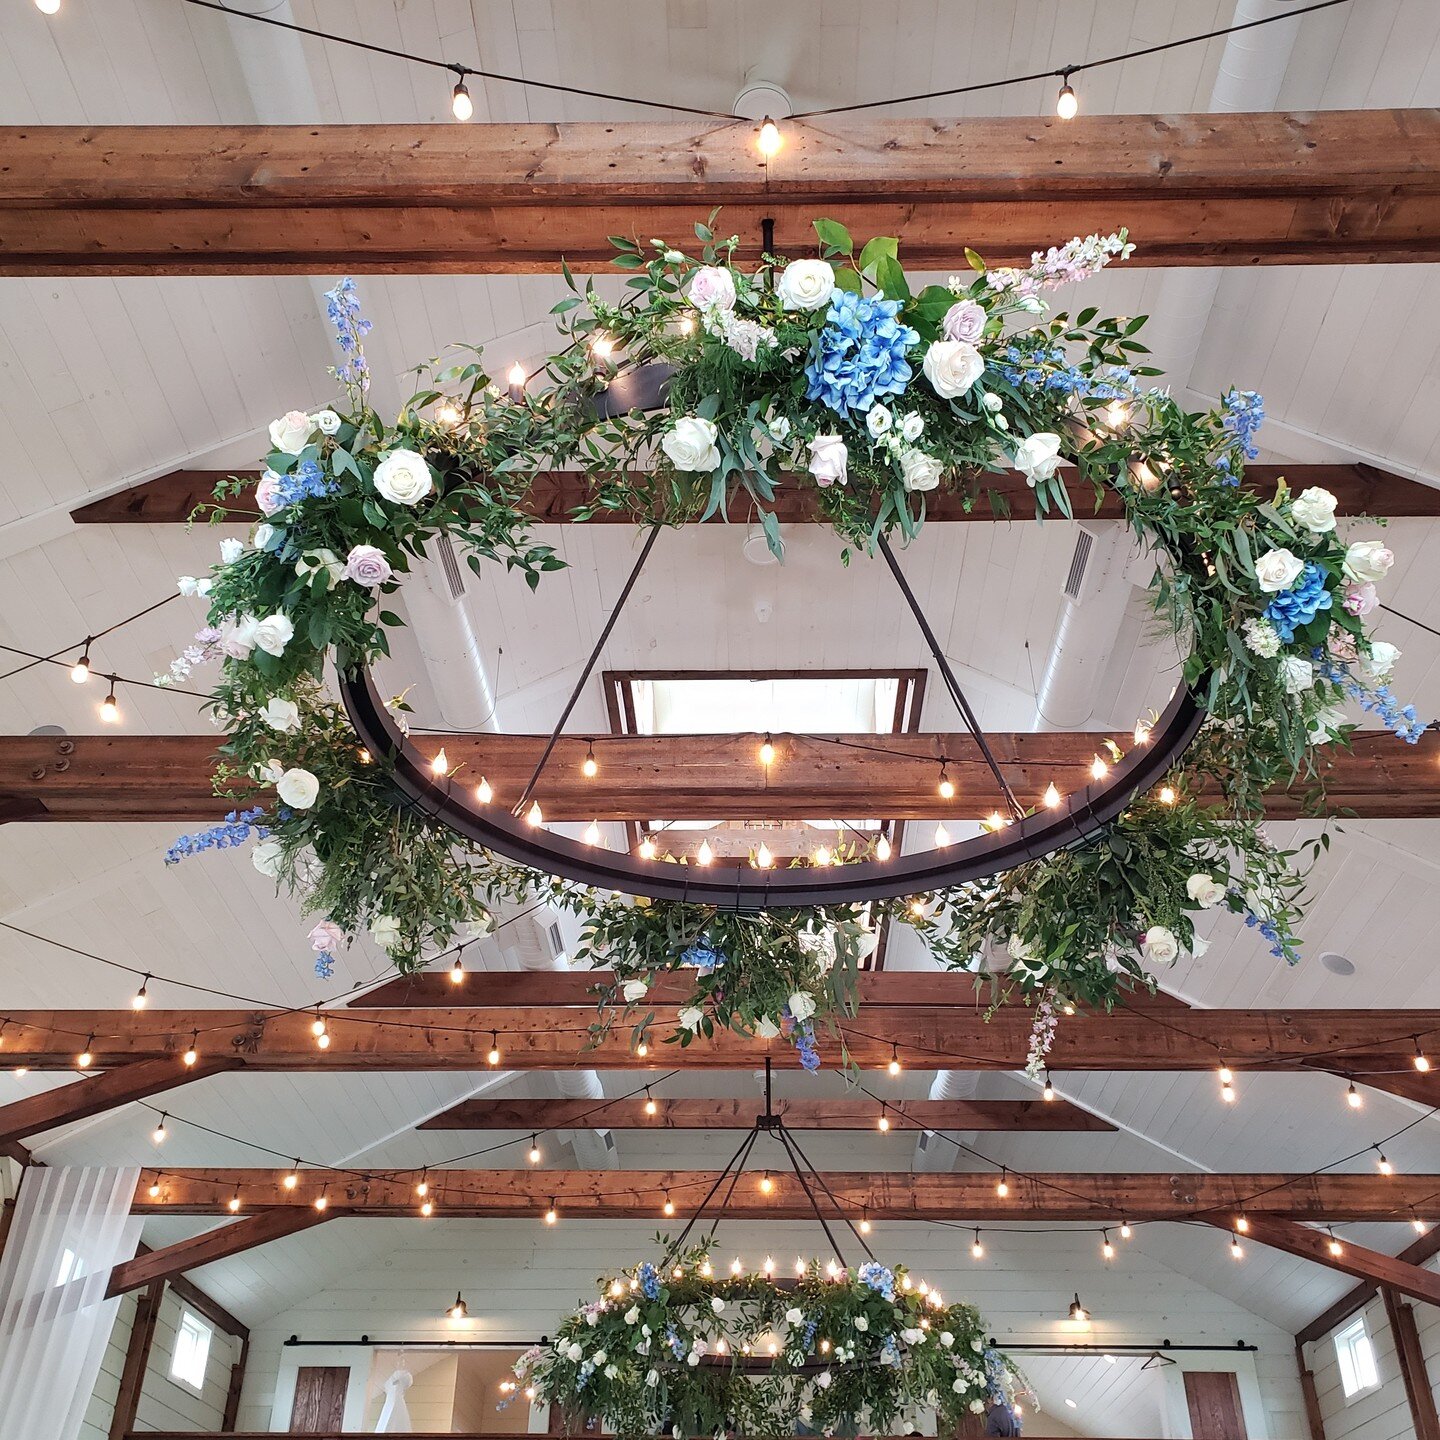 Our team is so excited to get back up on the ladders to create dramatic floral installments for our @tuckdinnfarm and @Harper brides! Beyond ready to kick off our 2024 wedding season!